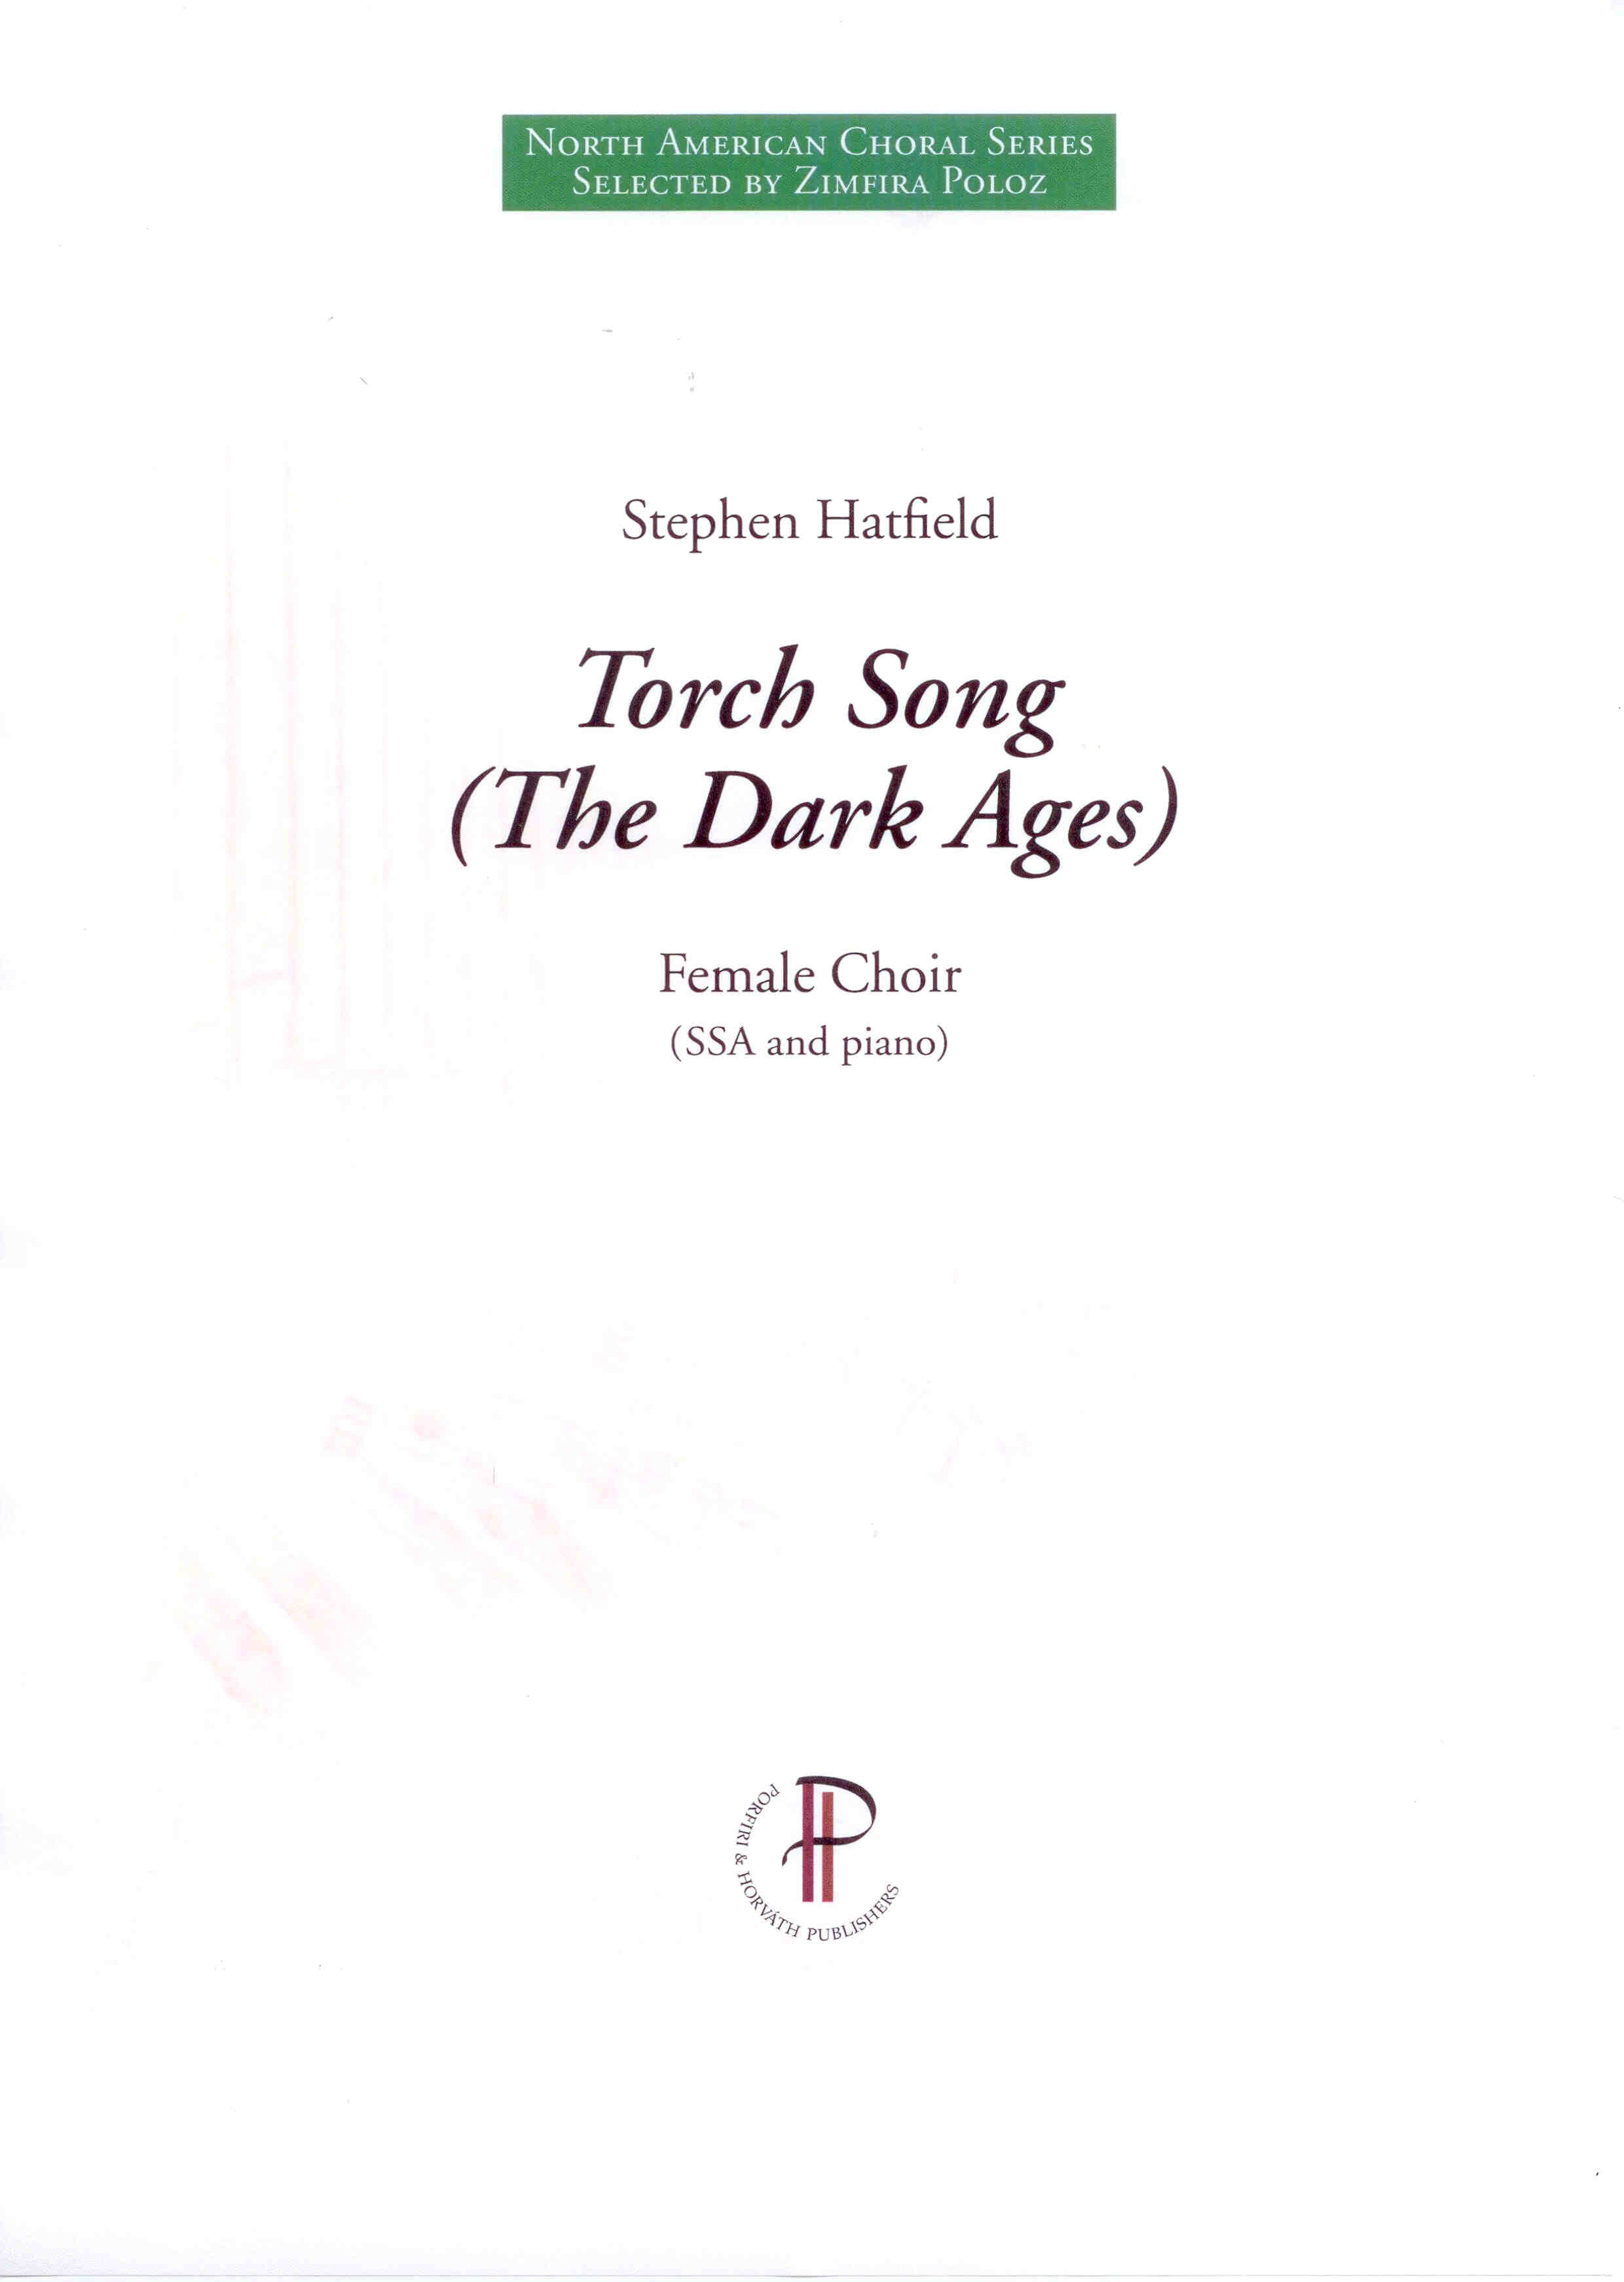 Torch Song - Show sample score